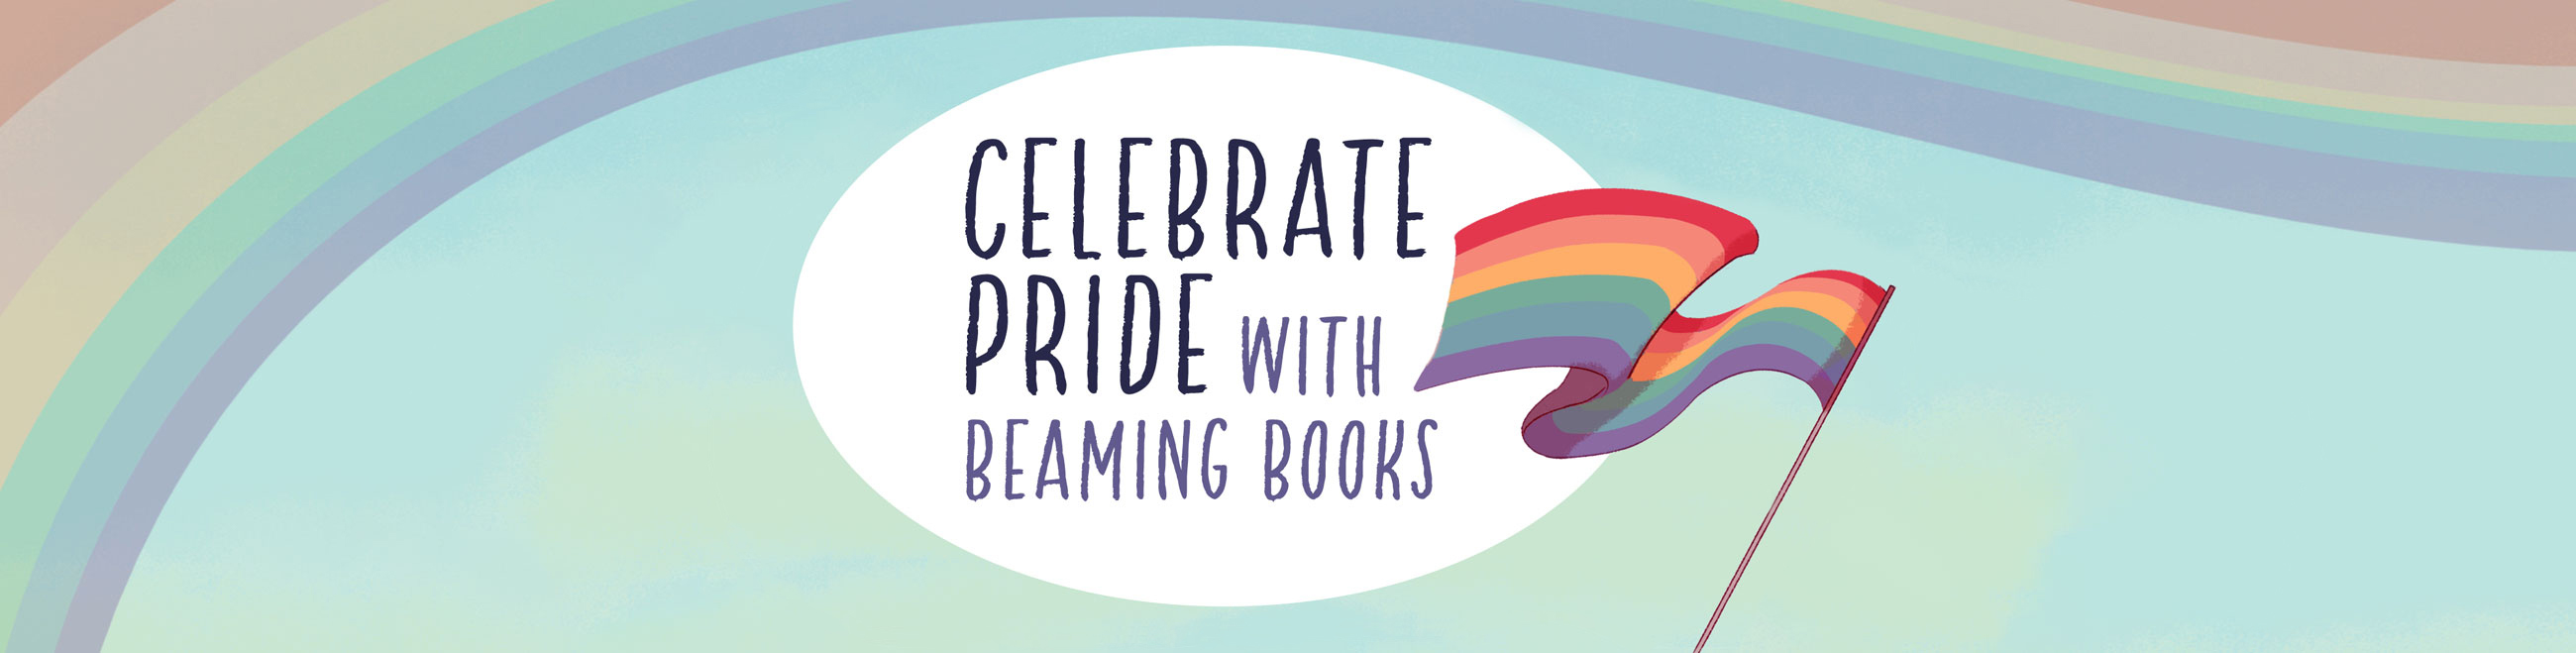 Celebrate Pride with Beaming Books